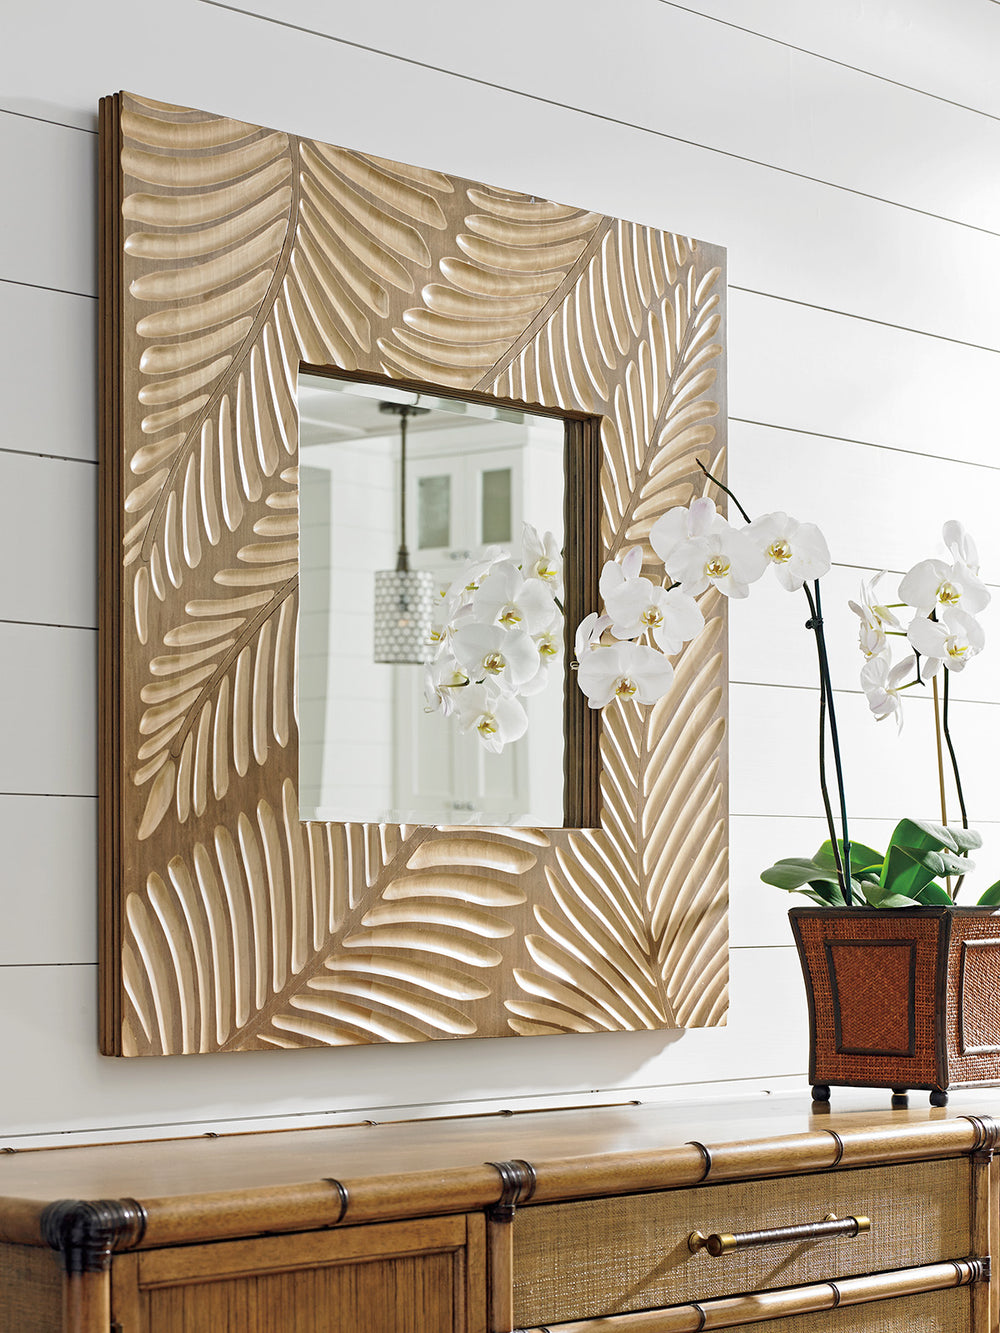 American Home Furniture | Tommy Bahama Home  - Twin Palms Freeport Square Mirror